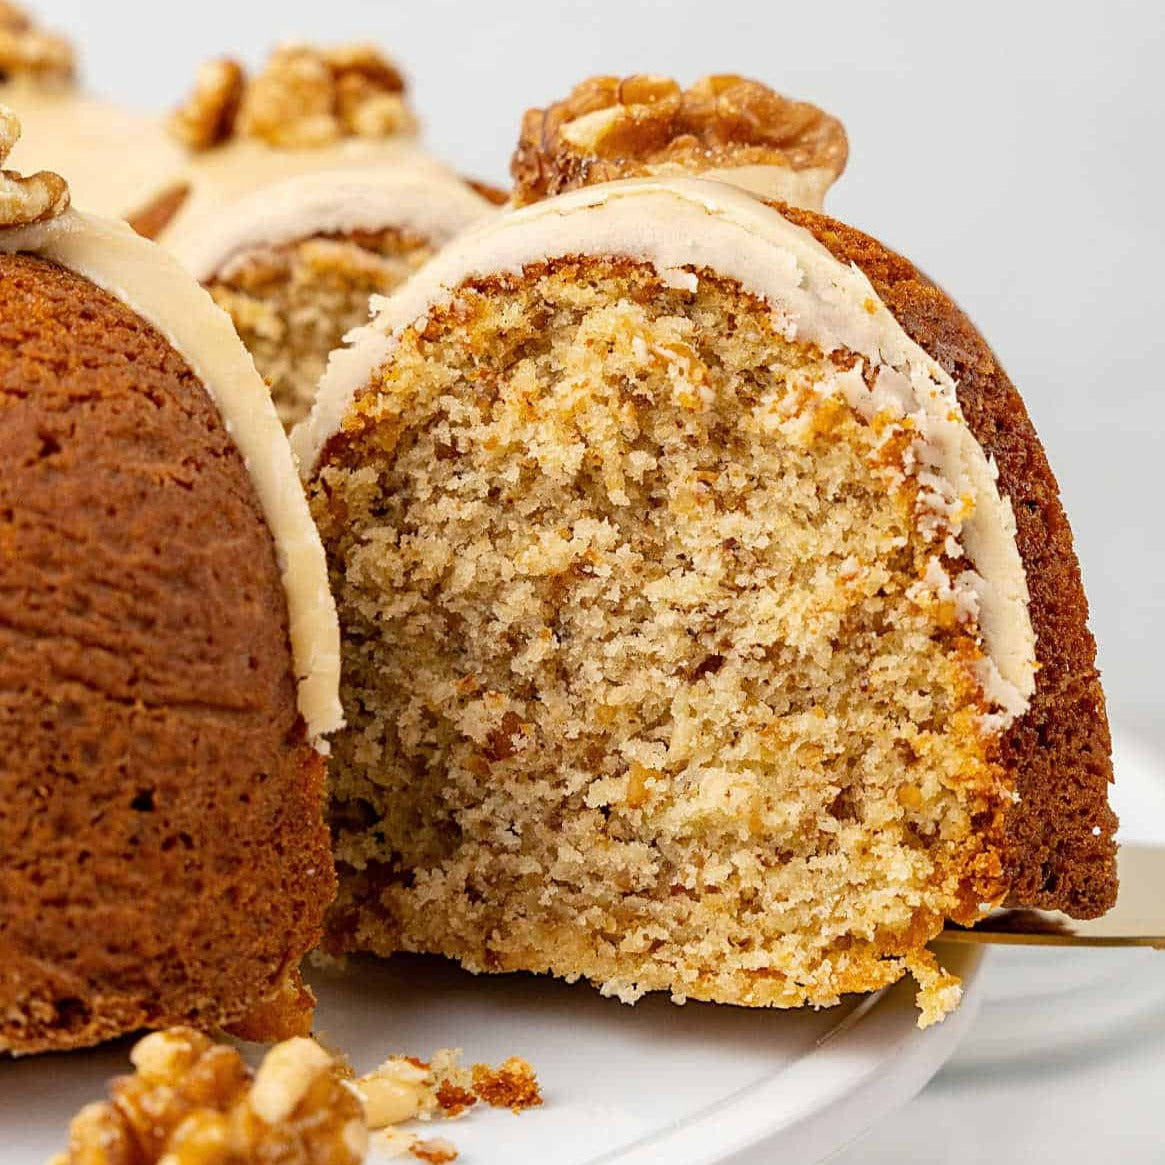 Discover the indulgent flavors of our Honey Walnut Matcha Bundt Cake. Healthy, fluffy, and uniquely delicious, this cake is a delightful treat for every moment.